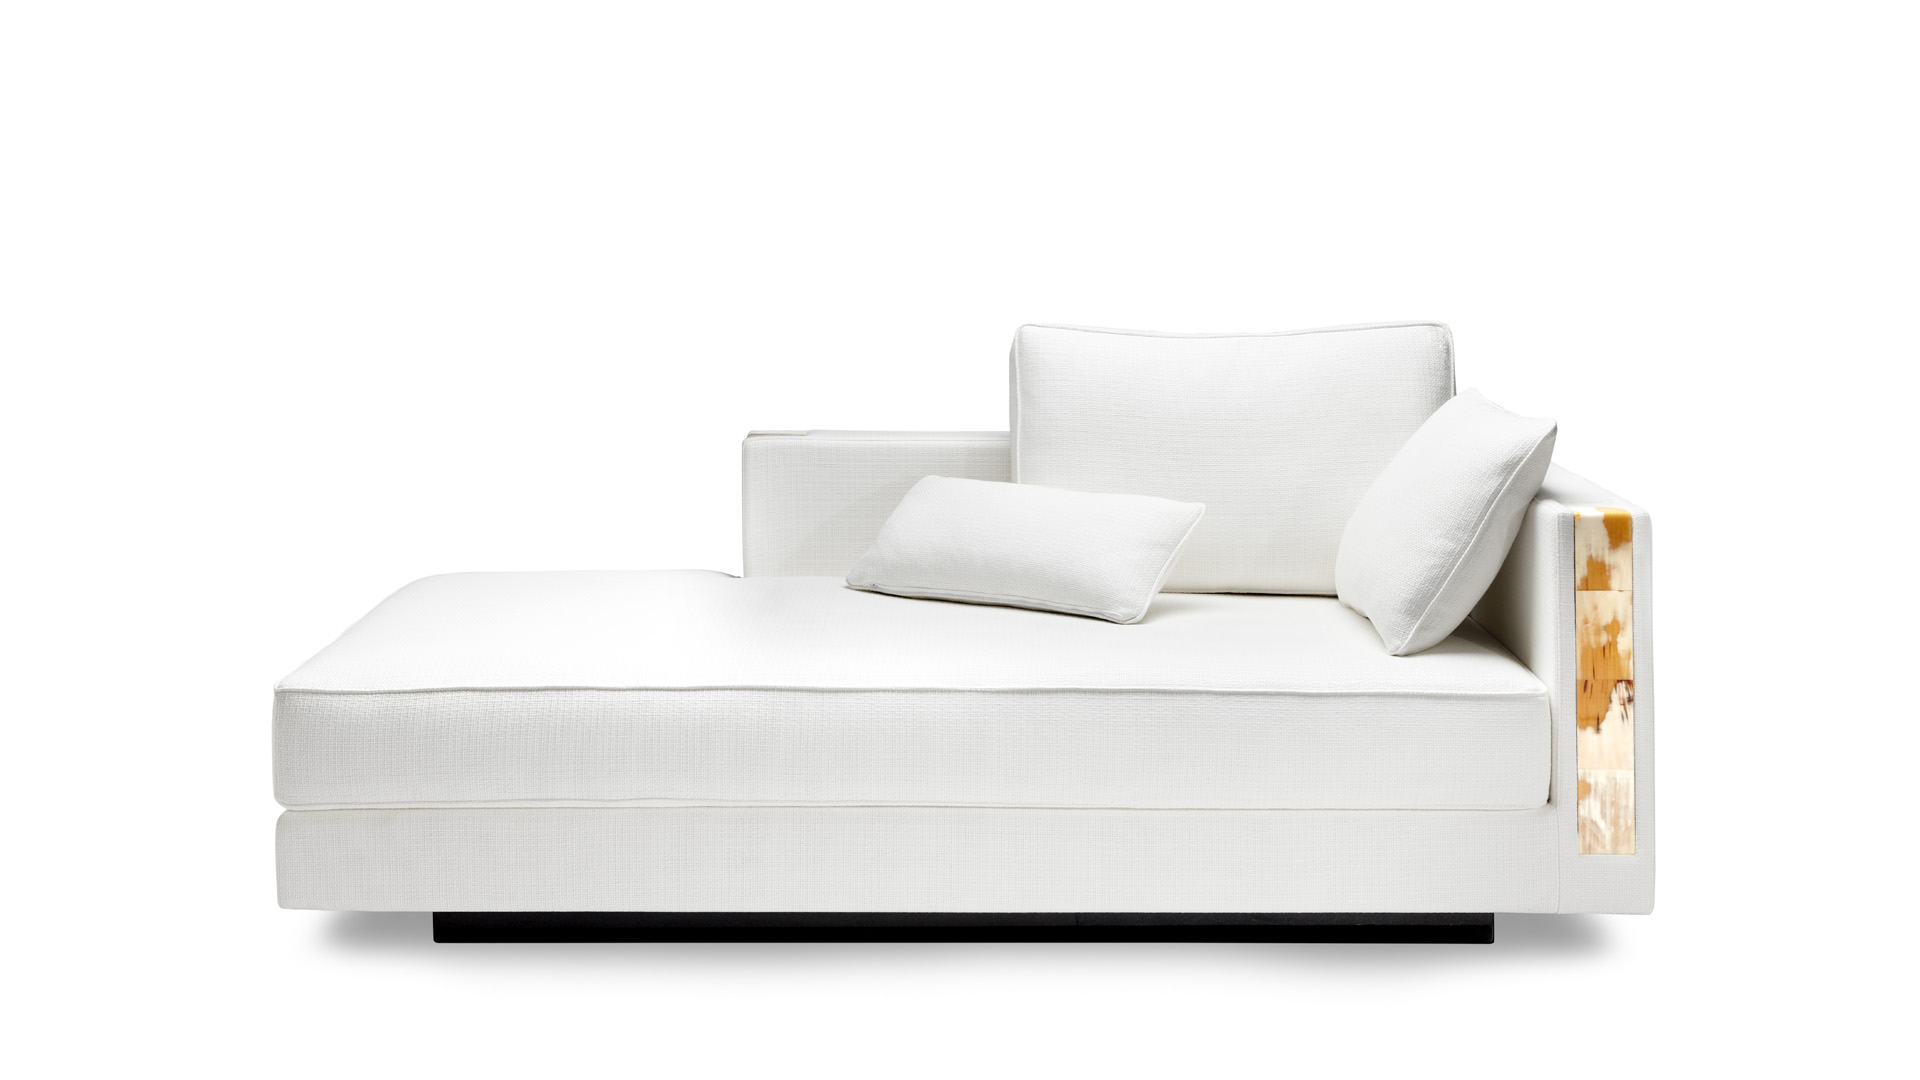 Sofas and seats - Adriano chaise longue with horn armrests and Grand Natté fabric - cover - Arcahorn